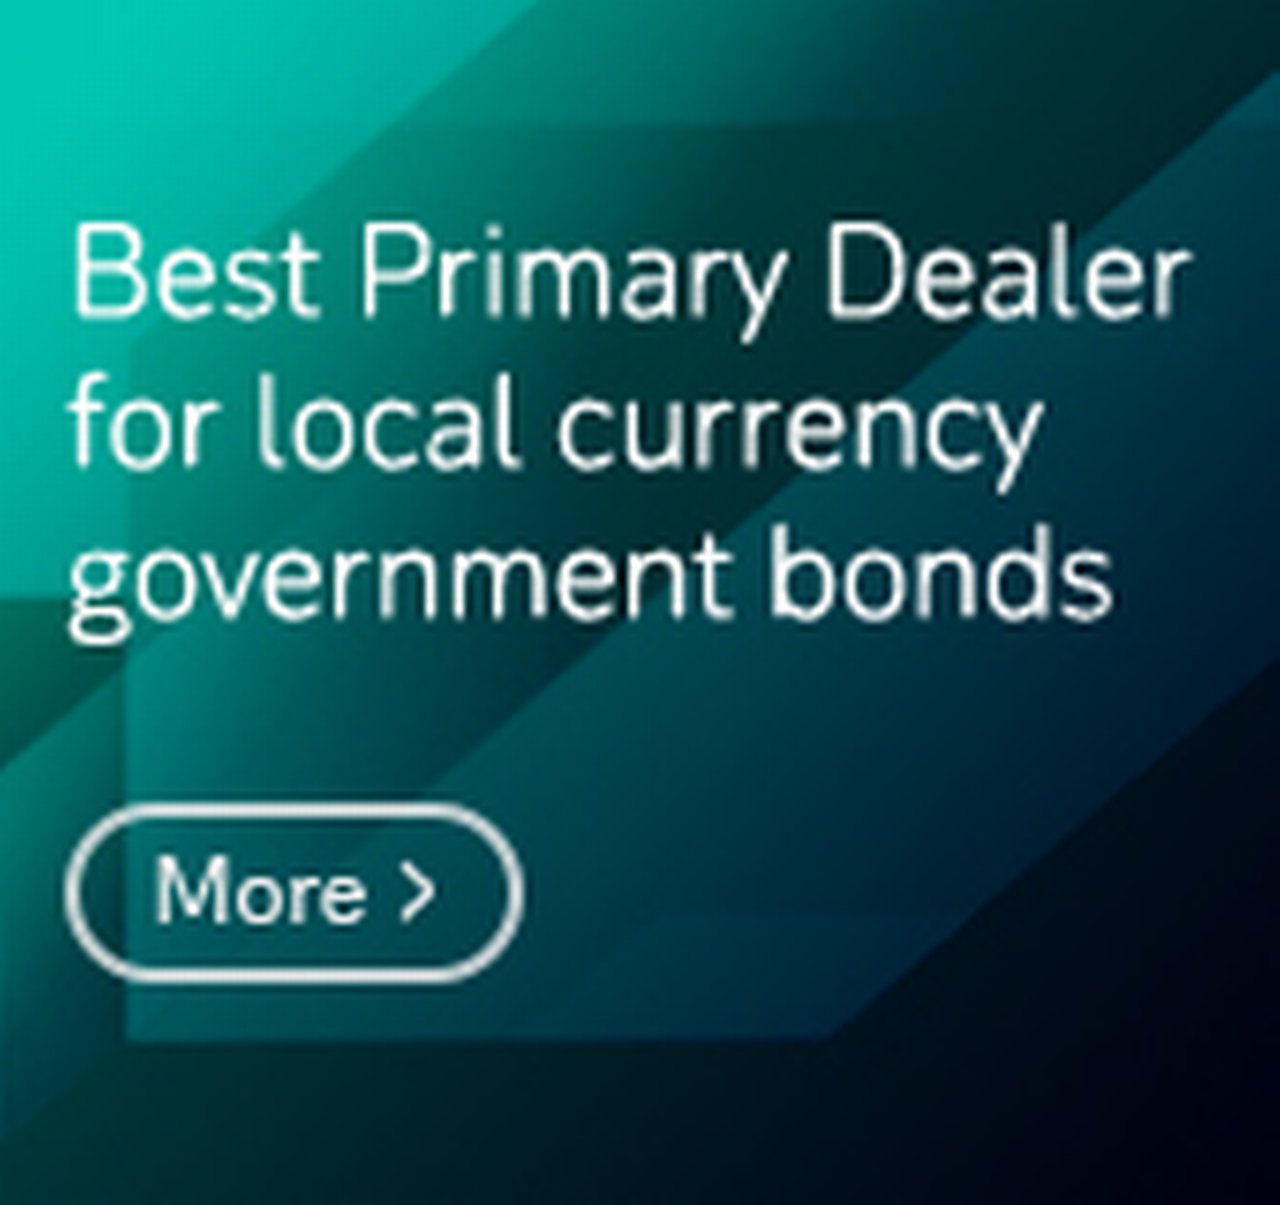 Best_Primary_Dealer_for_local_currency_government_bonds.jpg